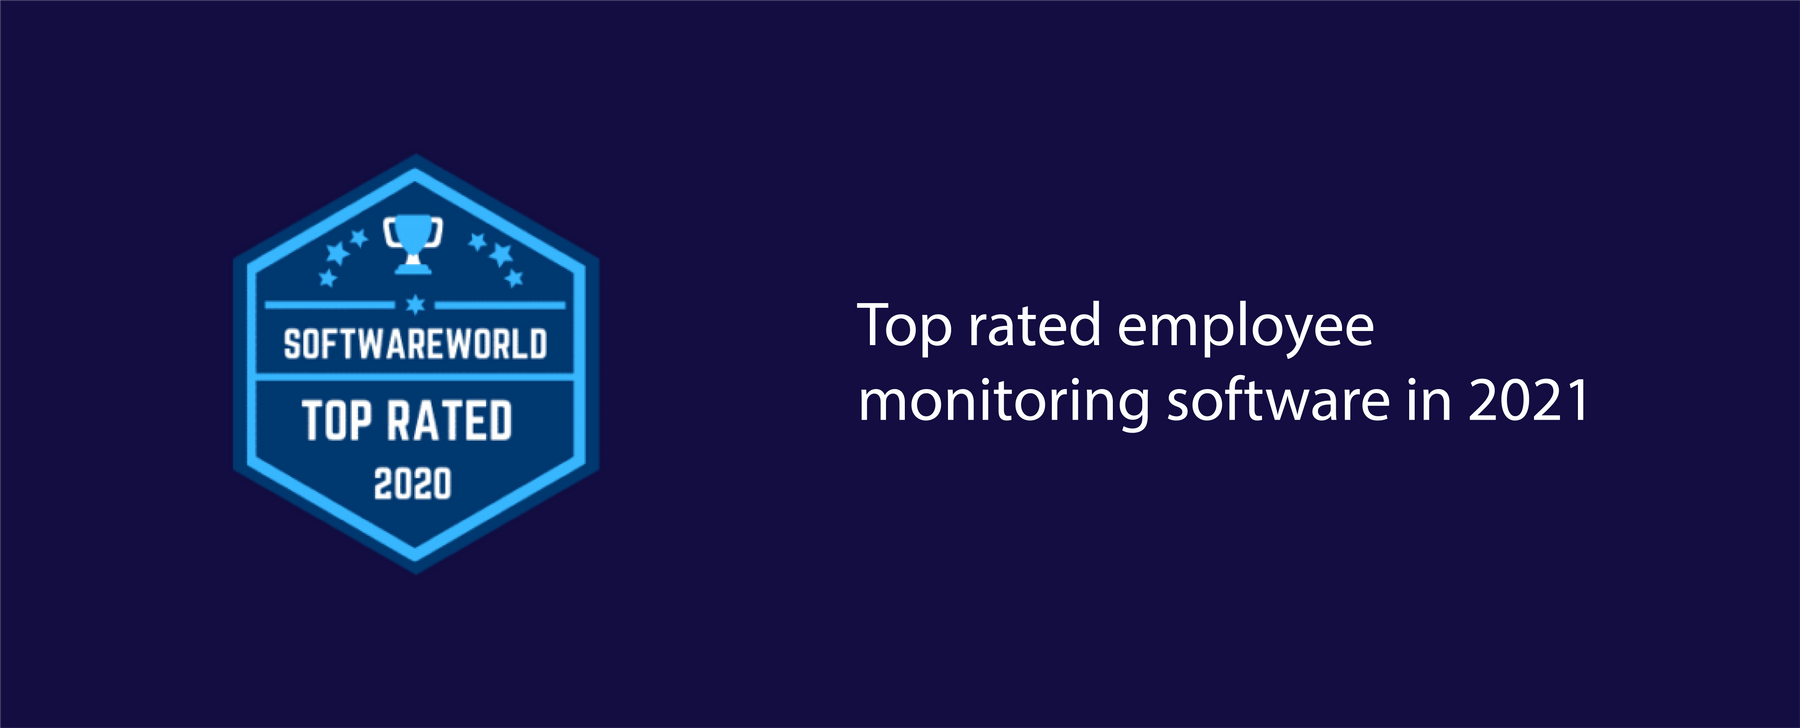 Apploye Recognized as Top Rated Employee Monitoring Software